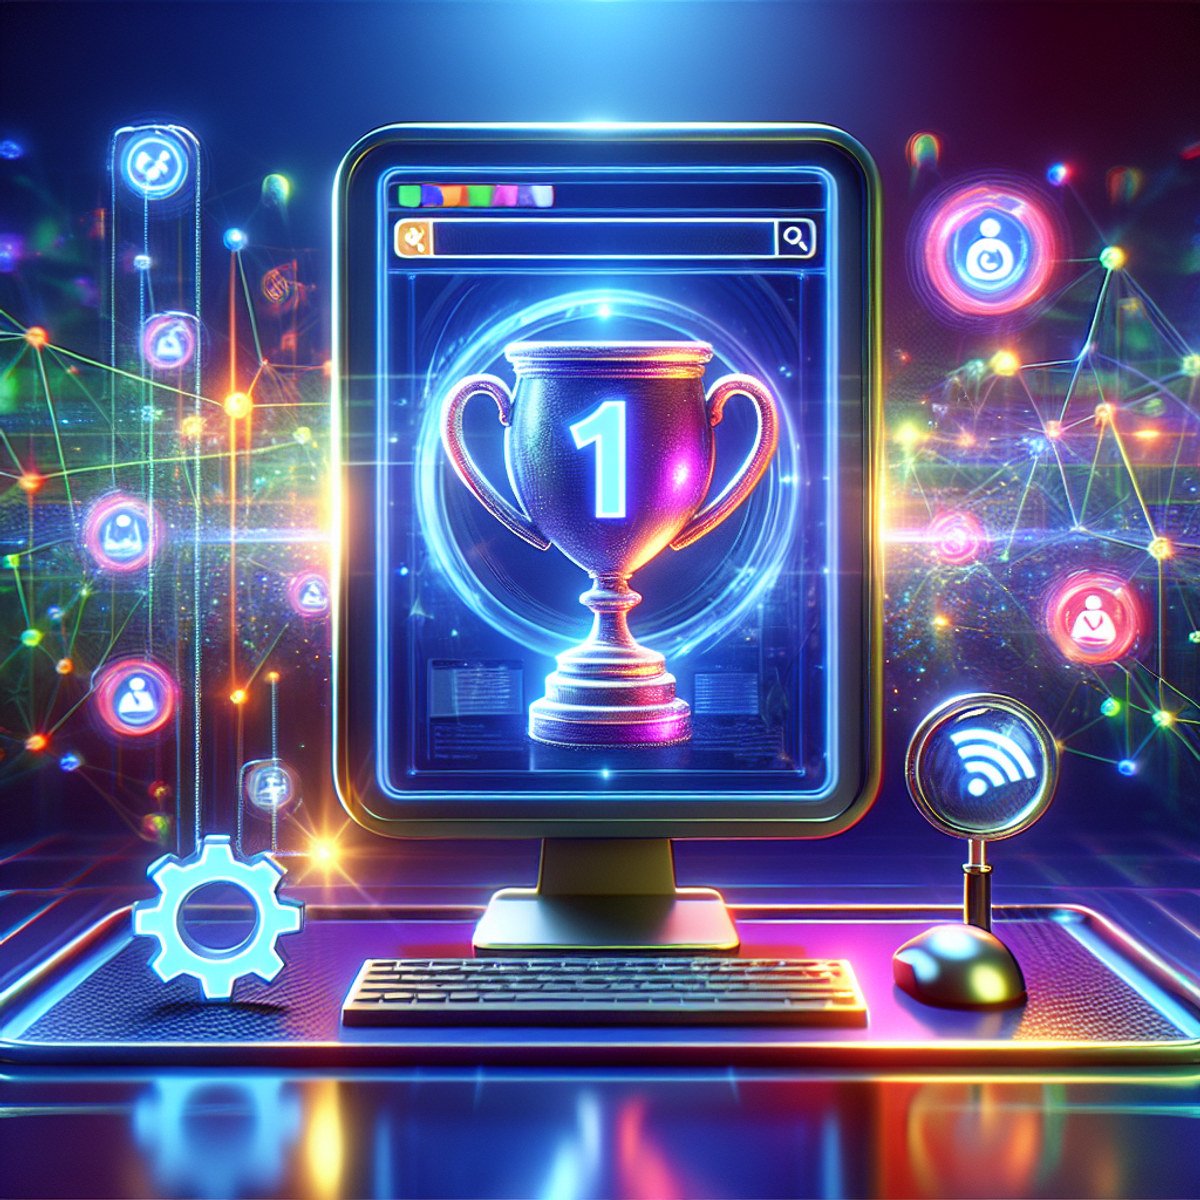 A computer screen displaying a futuristic search engine results page with a large trophy or number one icon at the top, surrounded by bright, colorful icons representing advanced SEO features such as keyword research, backlink analysis, and content optimization.